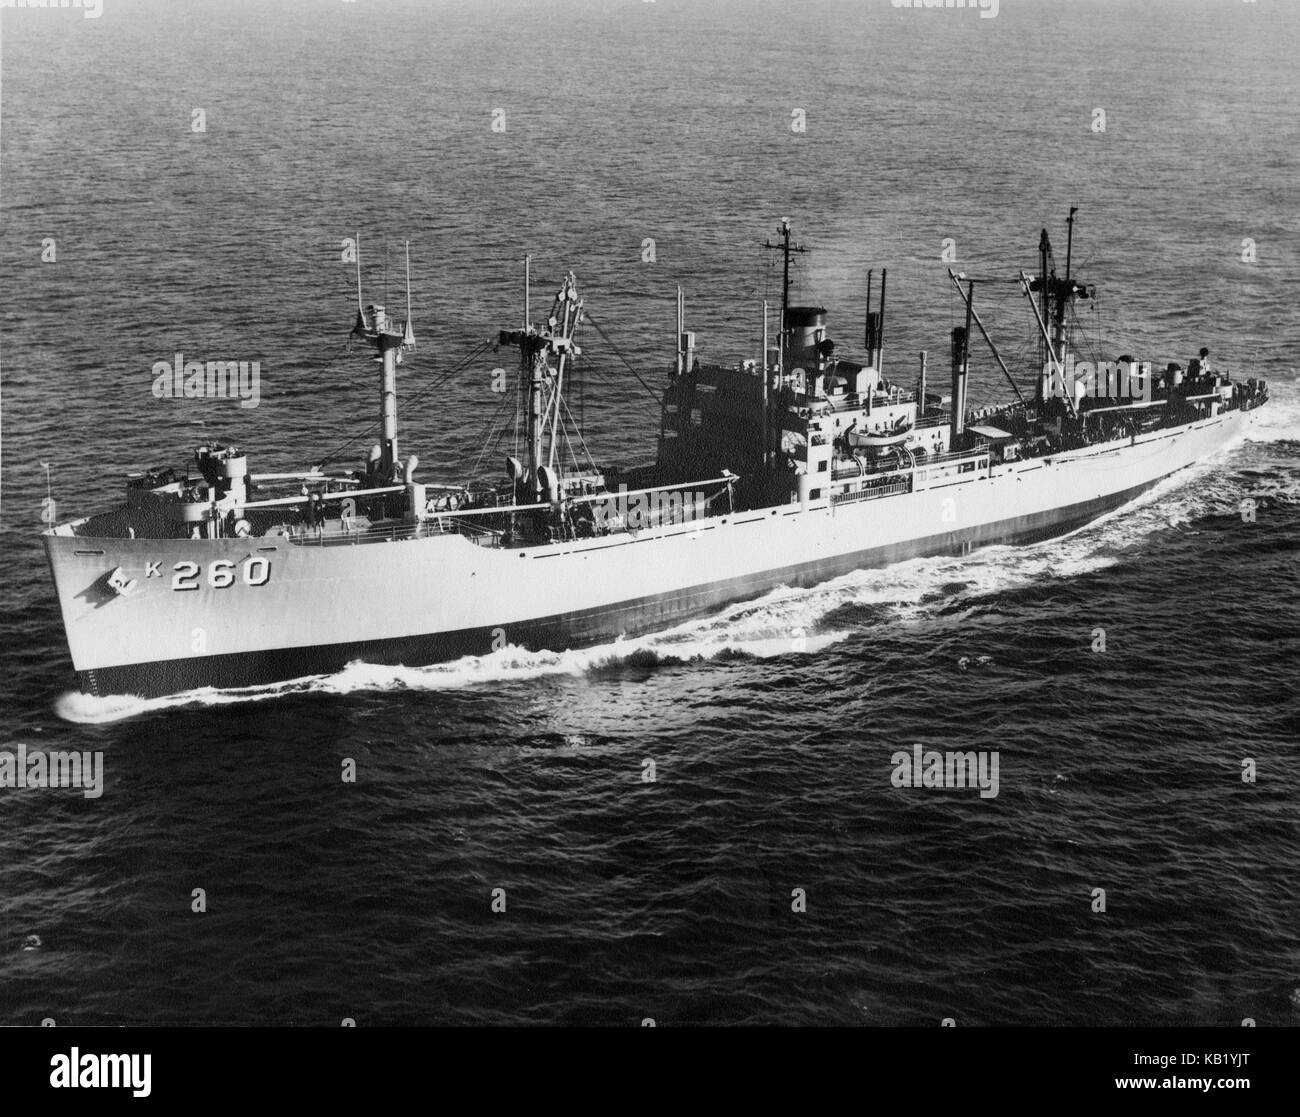 Antique c1950 photograph, USS Betelgeuse. USS Betelgeuse (AK-260) was the last of the cargo ships in service in the United States Navy. SOURCE: ORIGINAL PHOTOGRAPH. Stock Photo